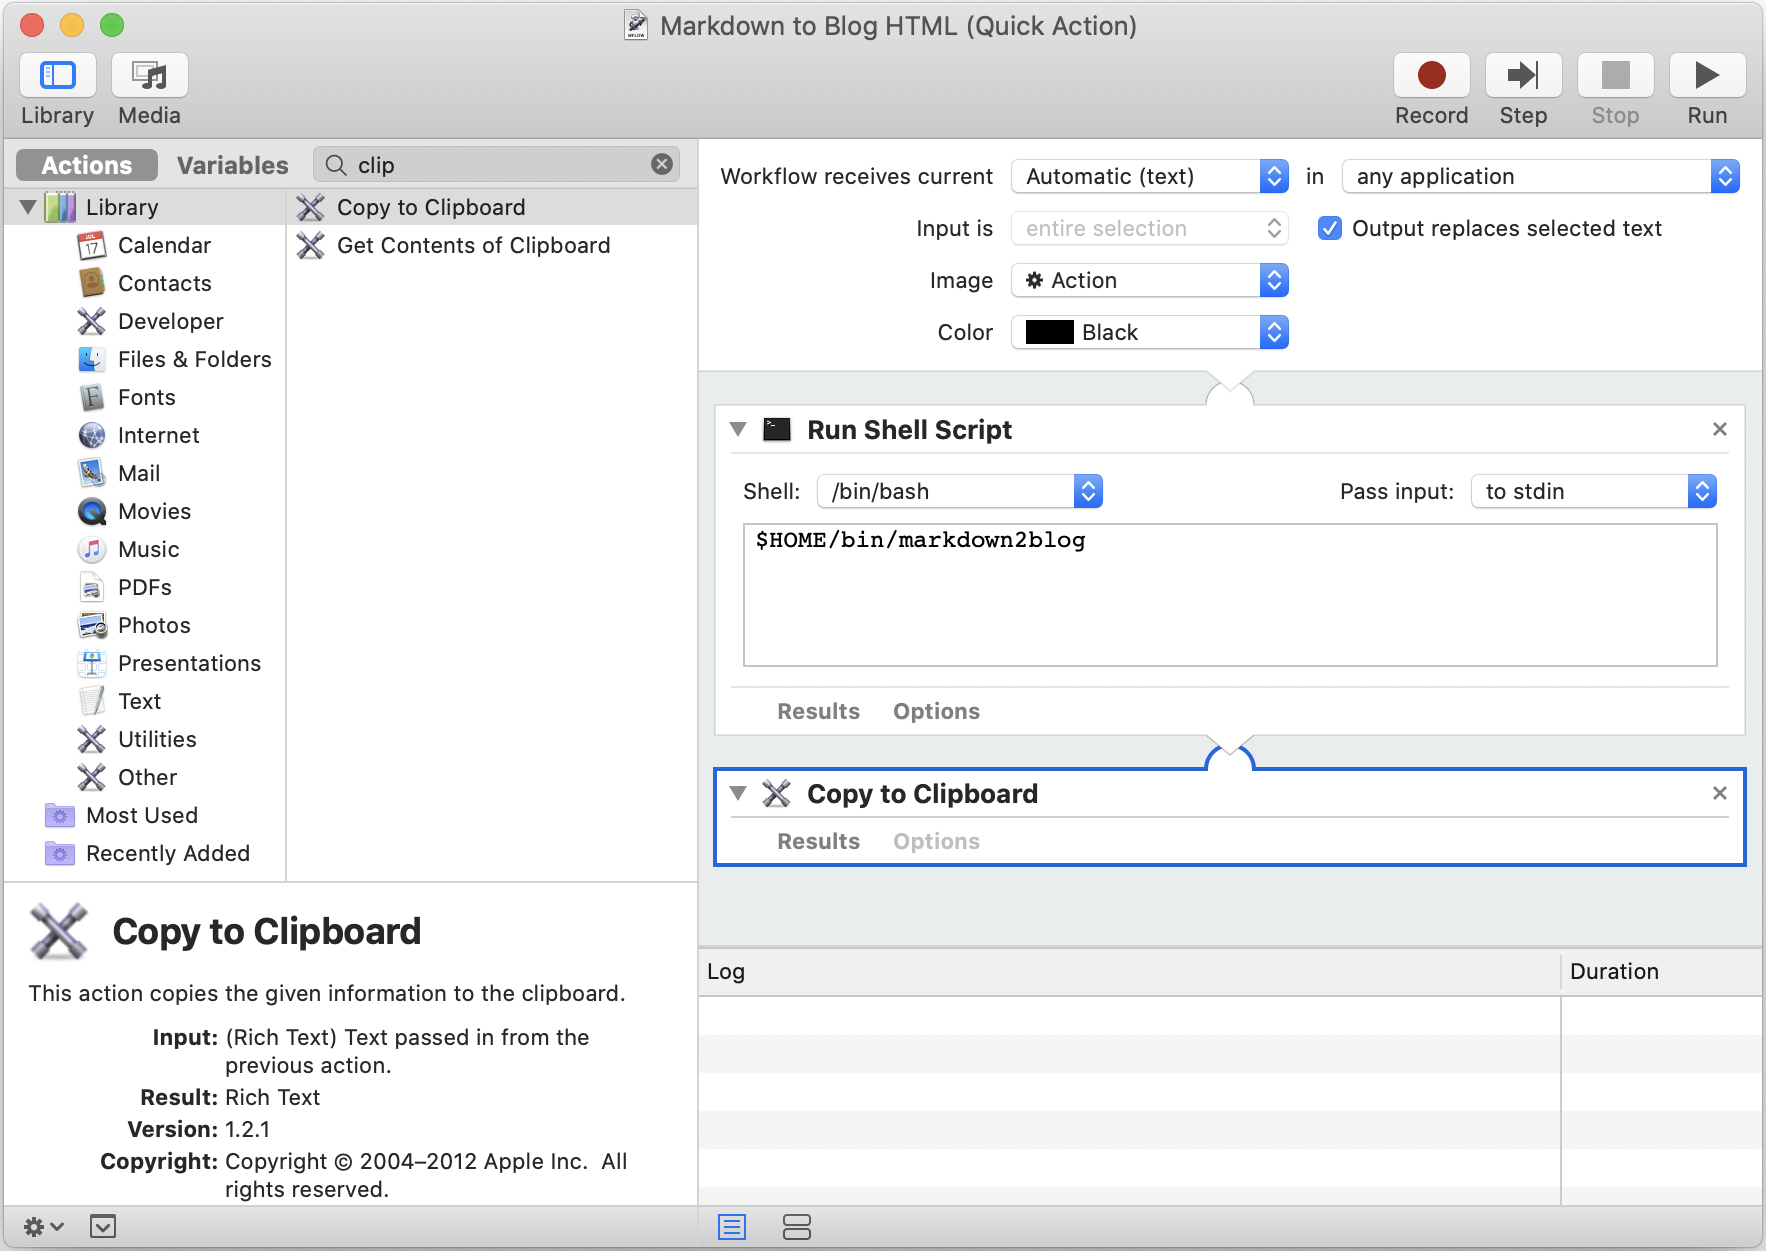 Automator Copy to Clipboard example: Use Copy to Clipboard in conjunction with “Output replaces selected text” to work around Safari’s Services bug.; Safari; Automator; Services, Quick Actions